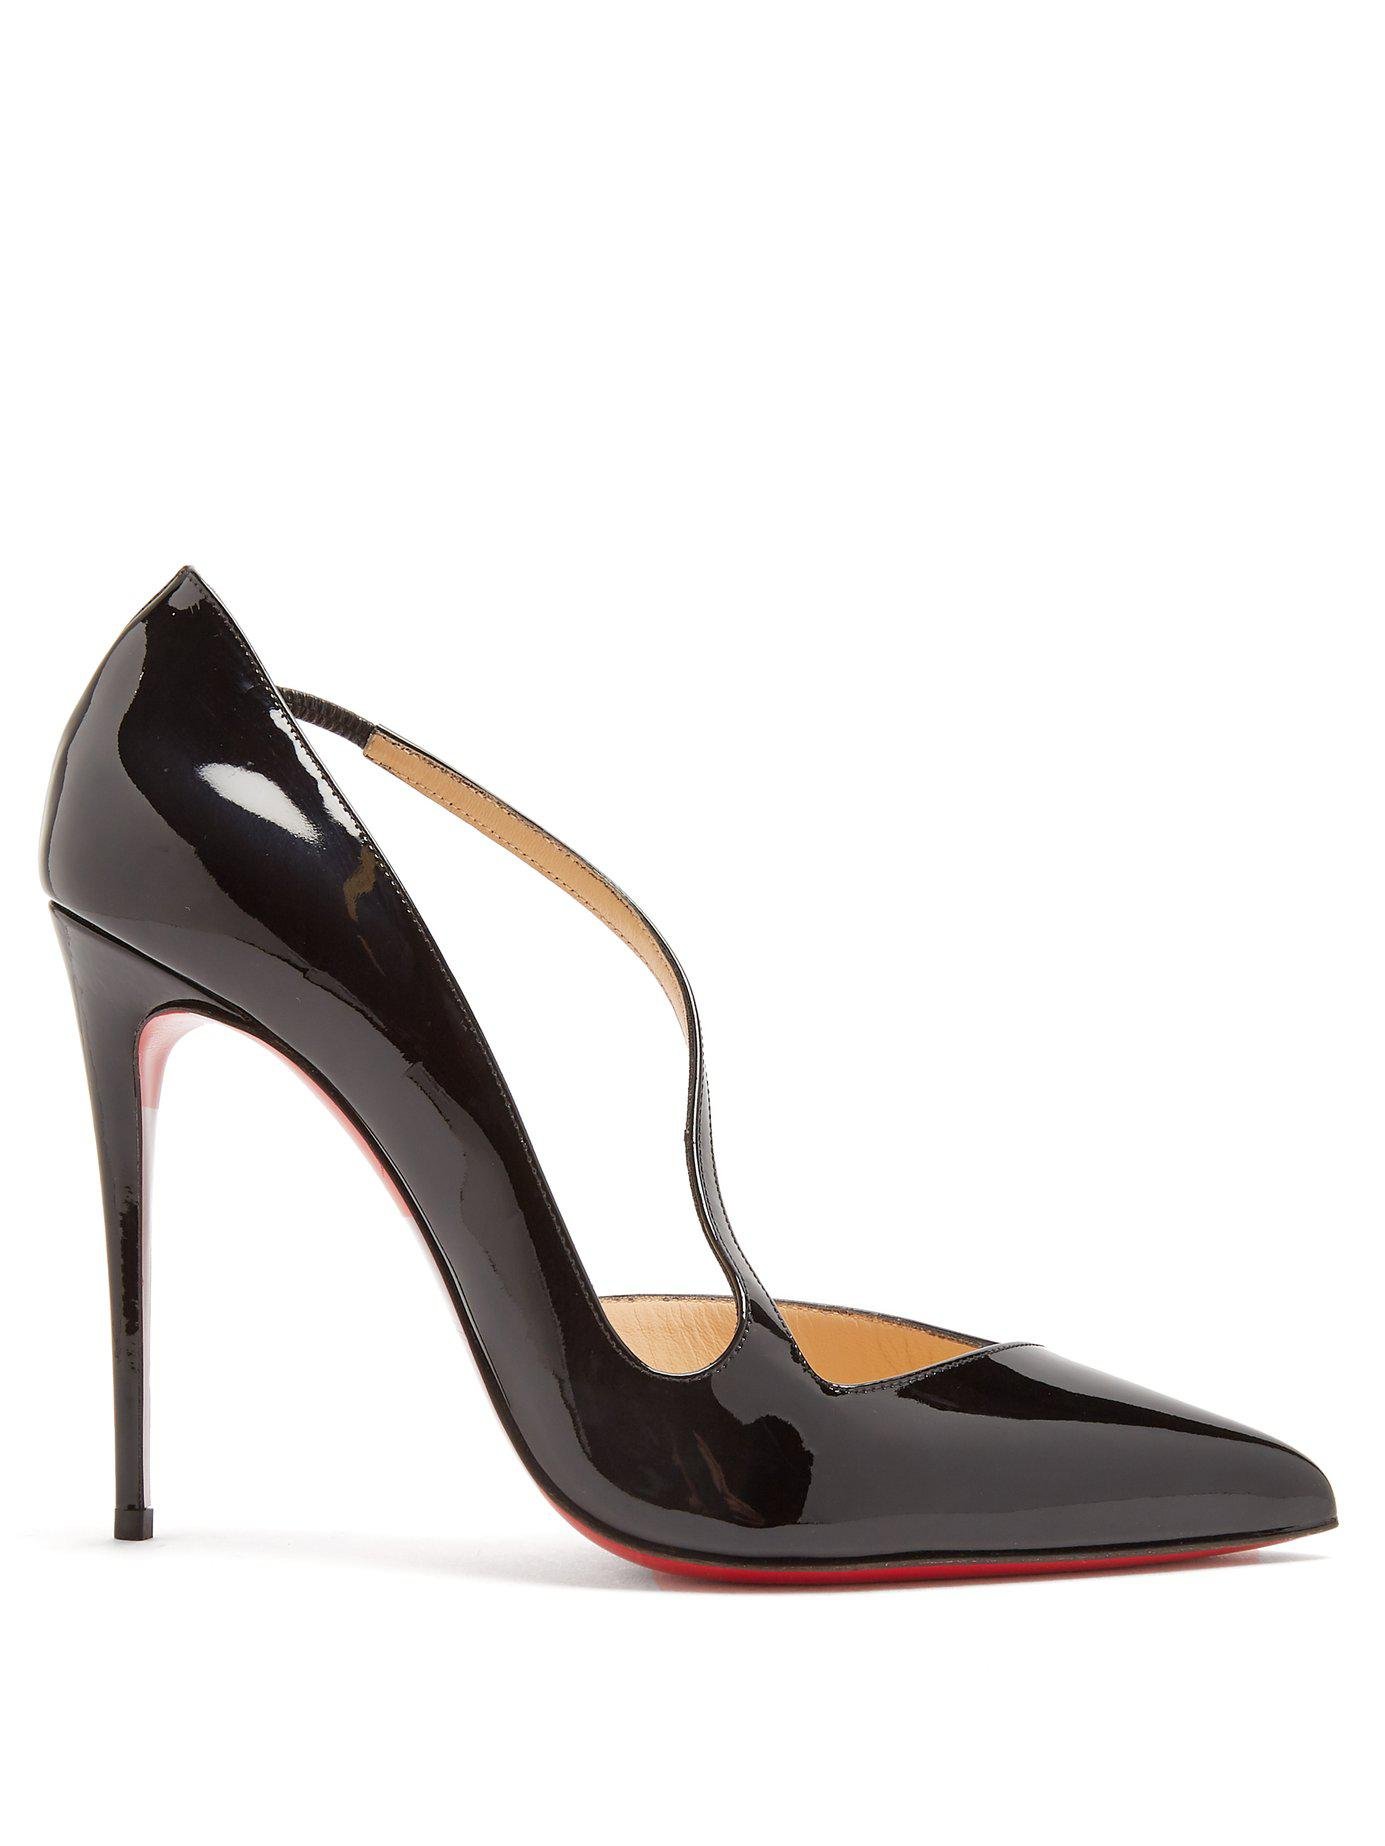 Christian Louboutin Jumping 85 Patent Leather Pumps in Black | Lyst